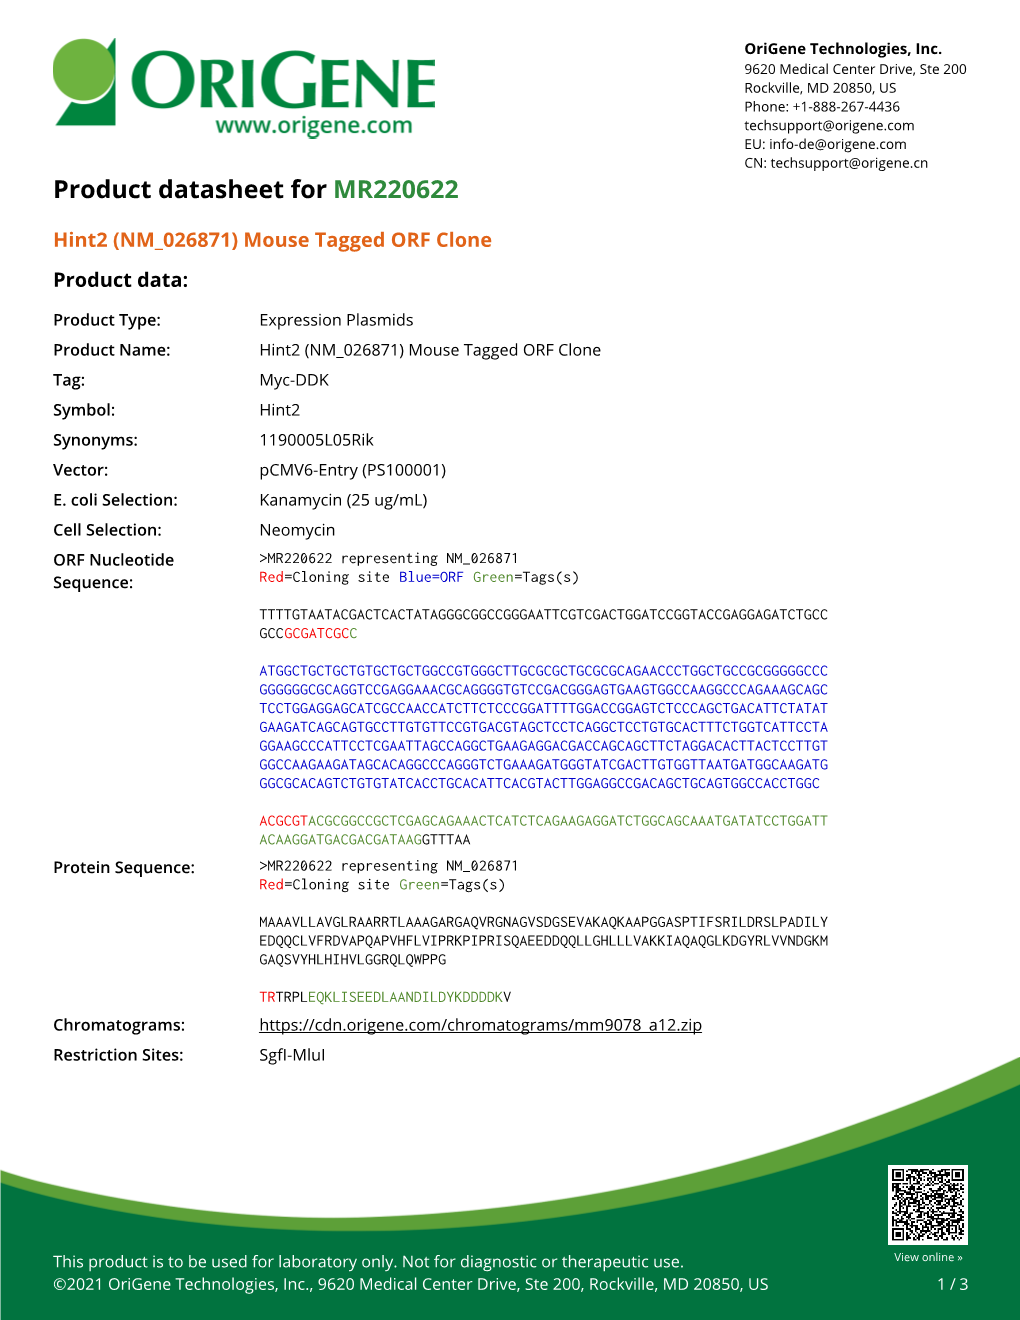 Hint2 (NM 026871) Mouse Tagged ORF Clone Product Data